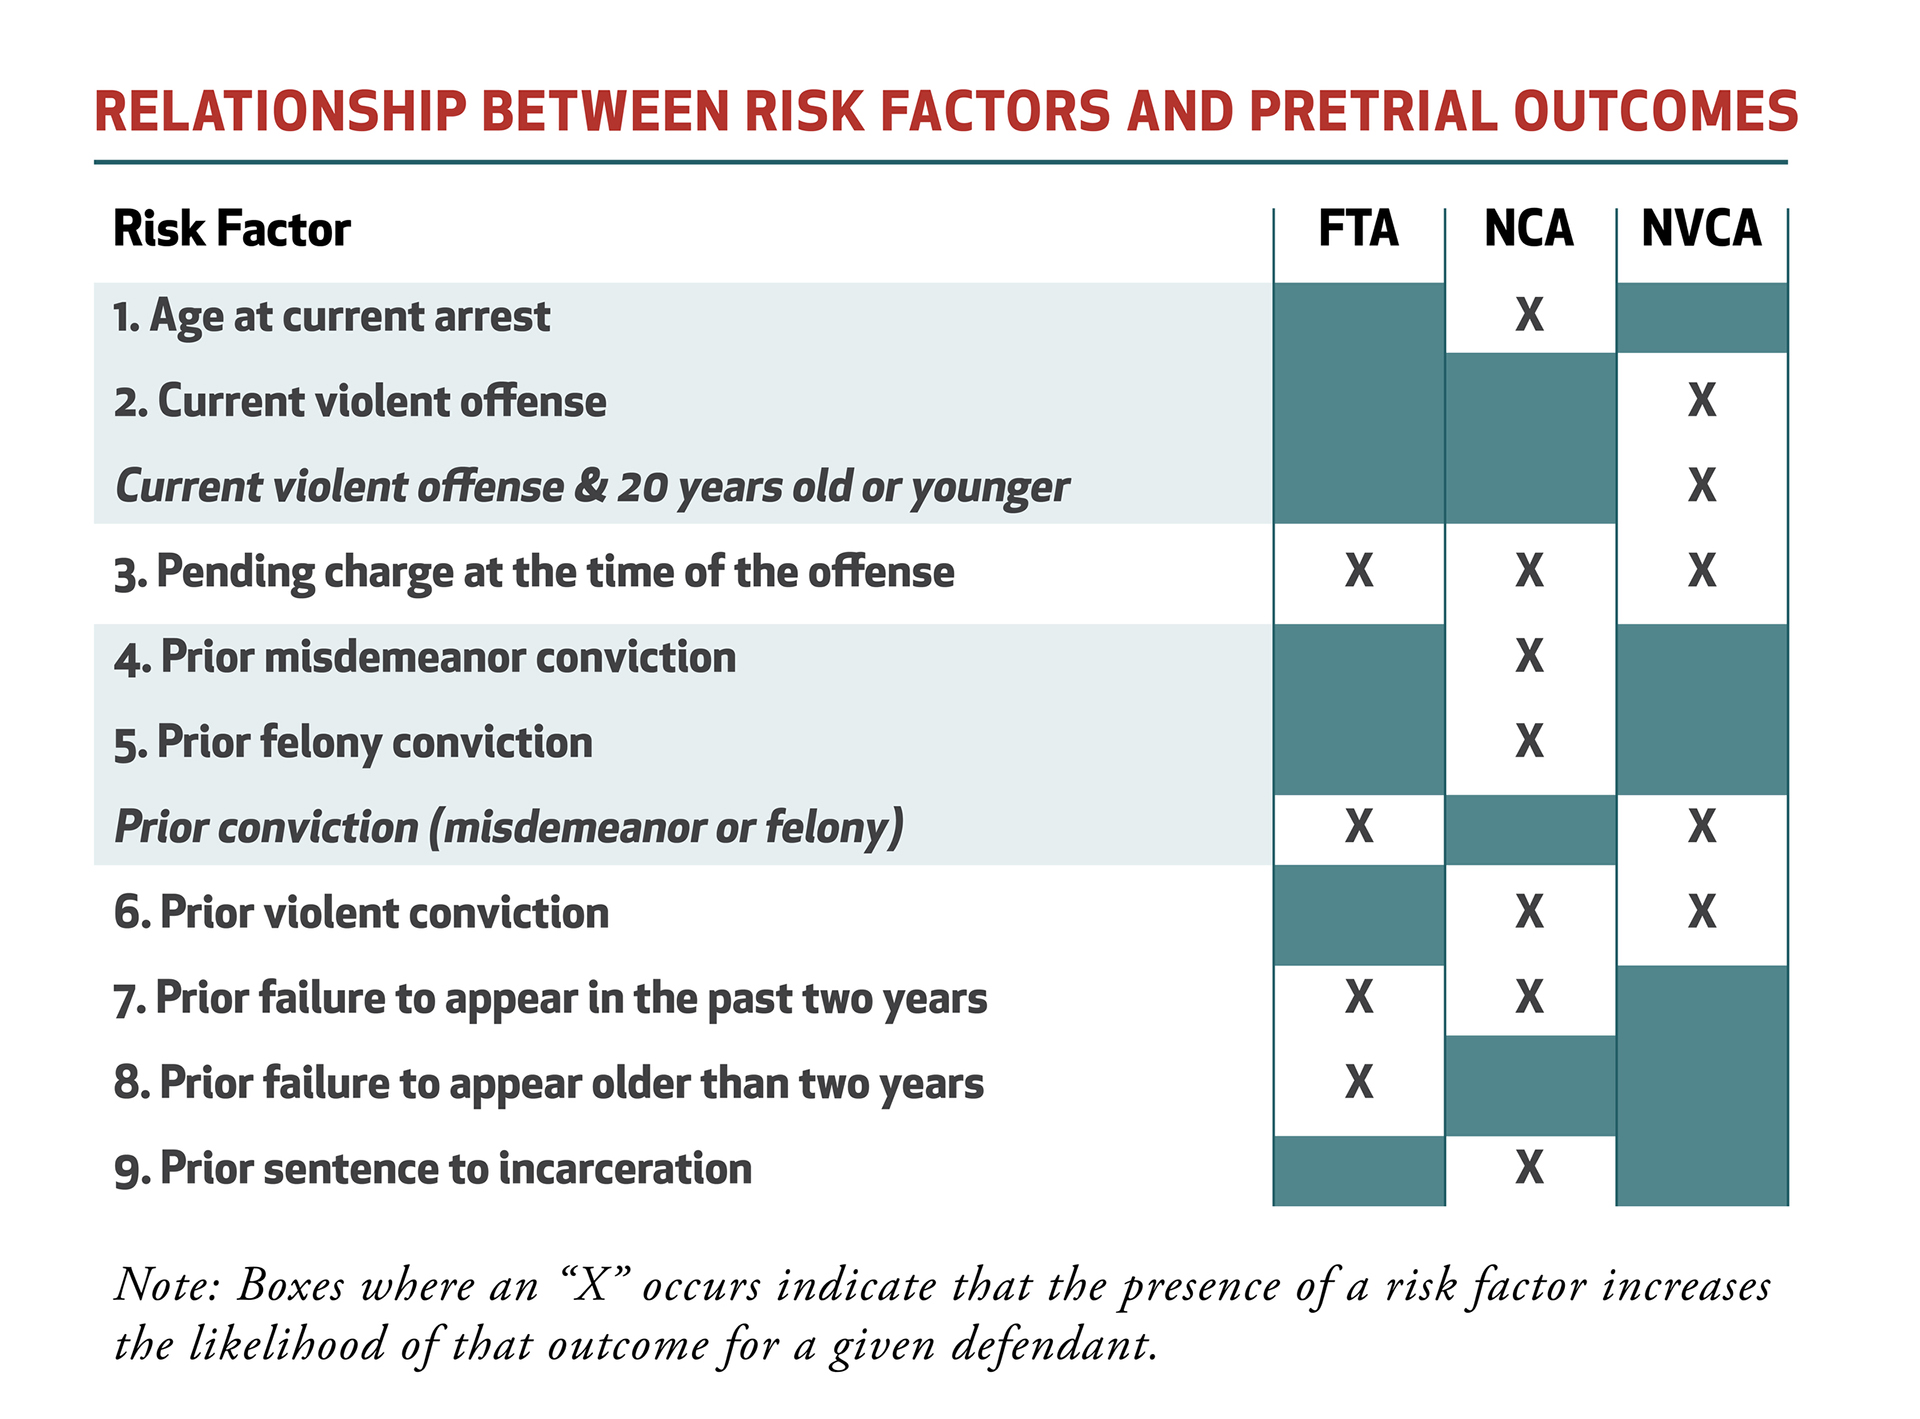 A chart lists the relationship between risk factors and pretrial outcomes for defendants.